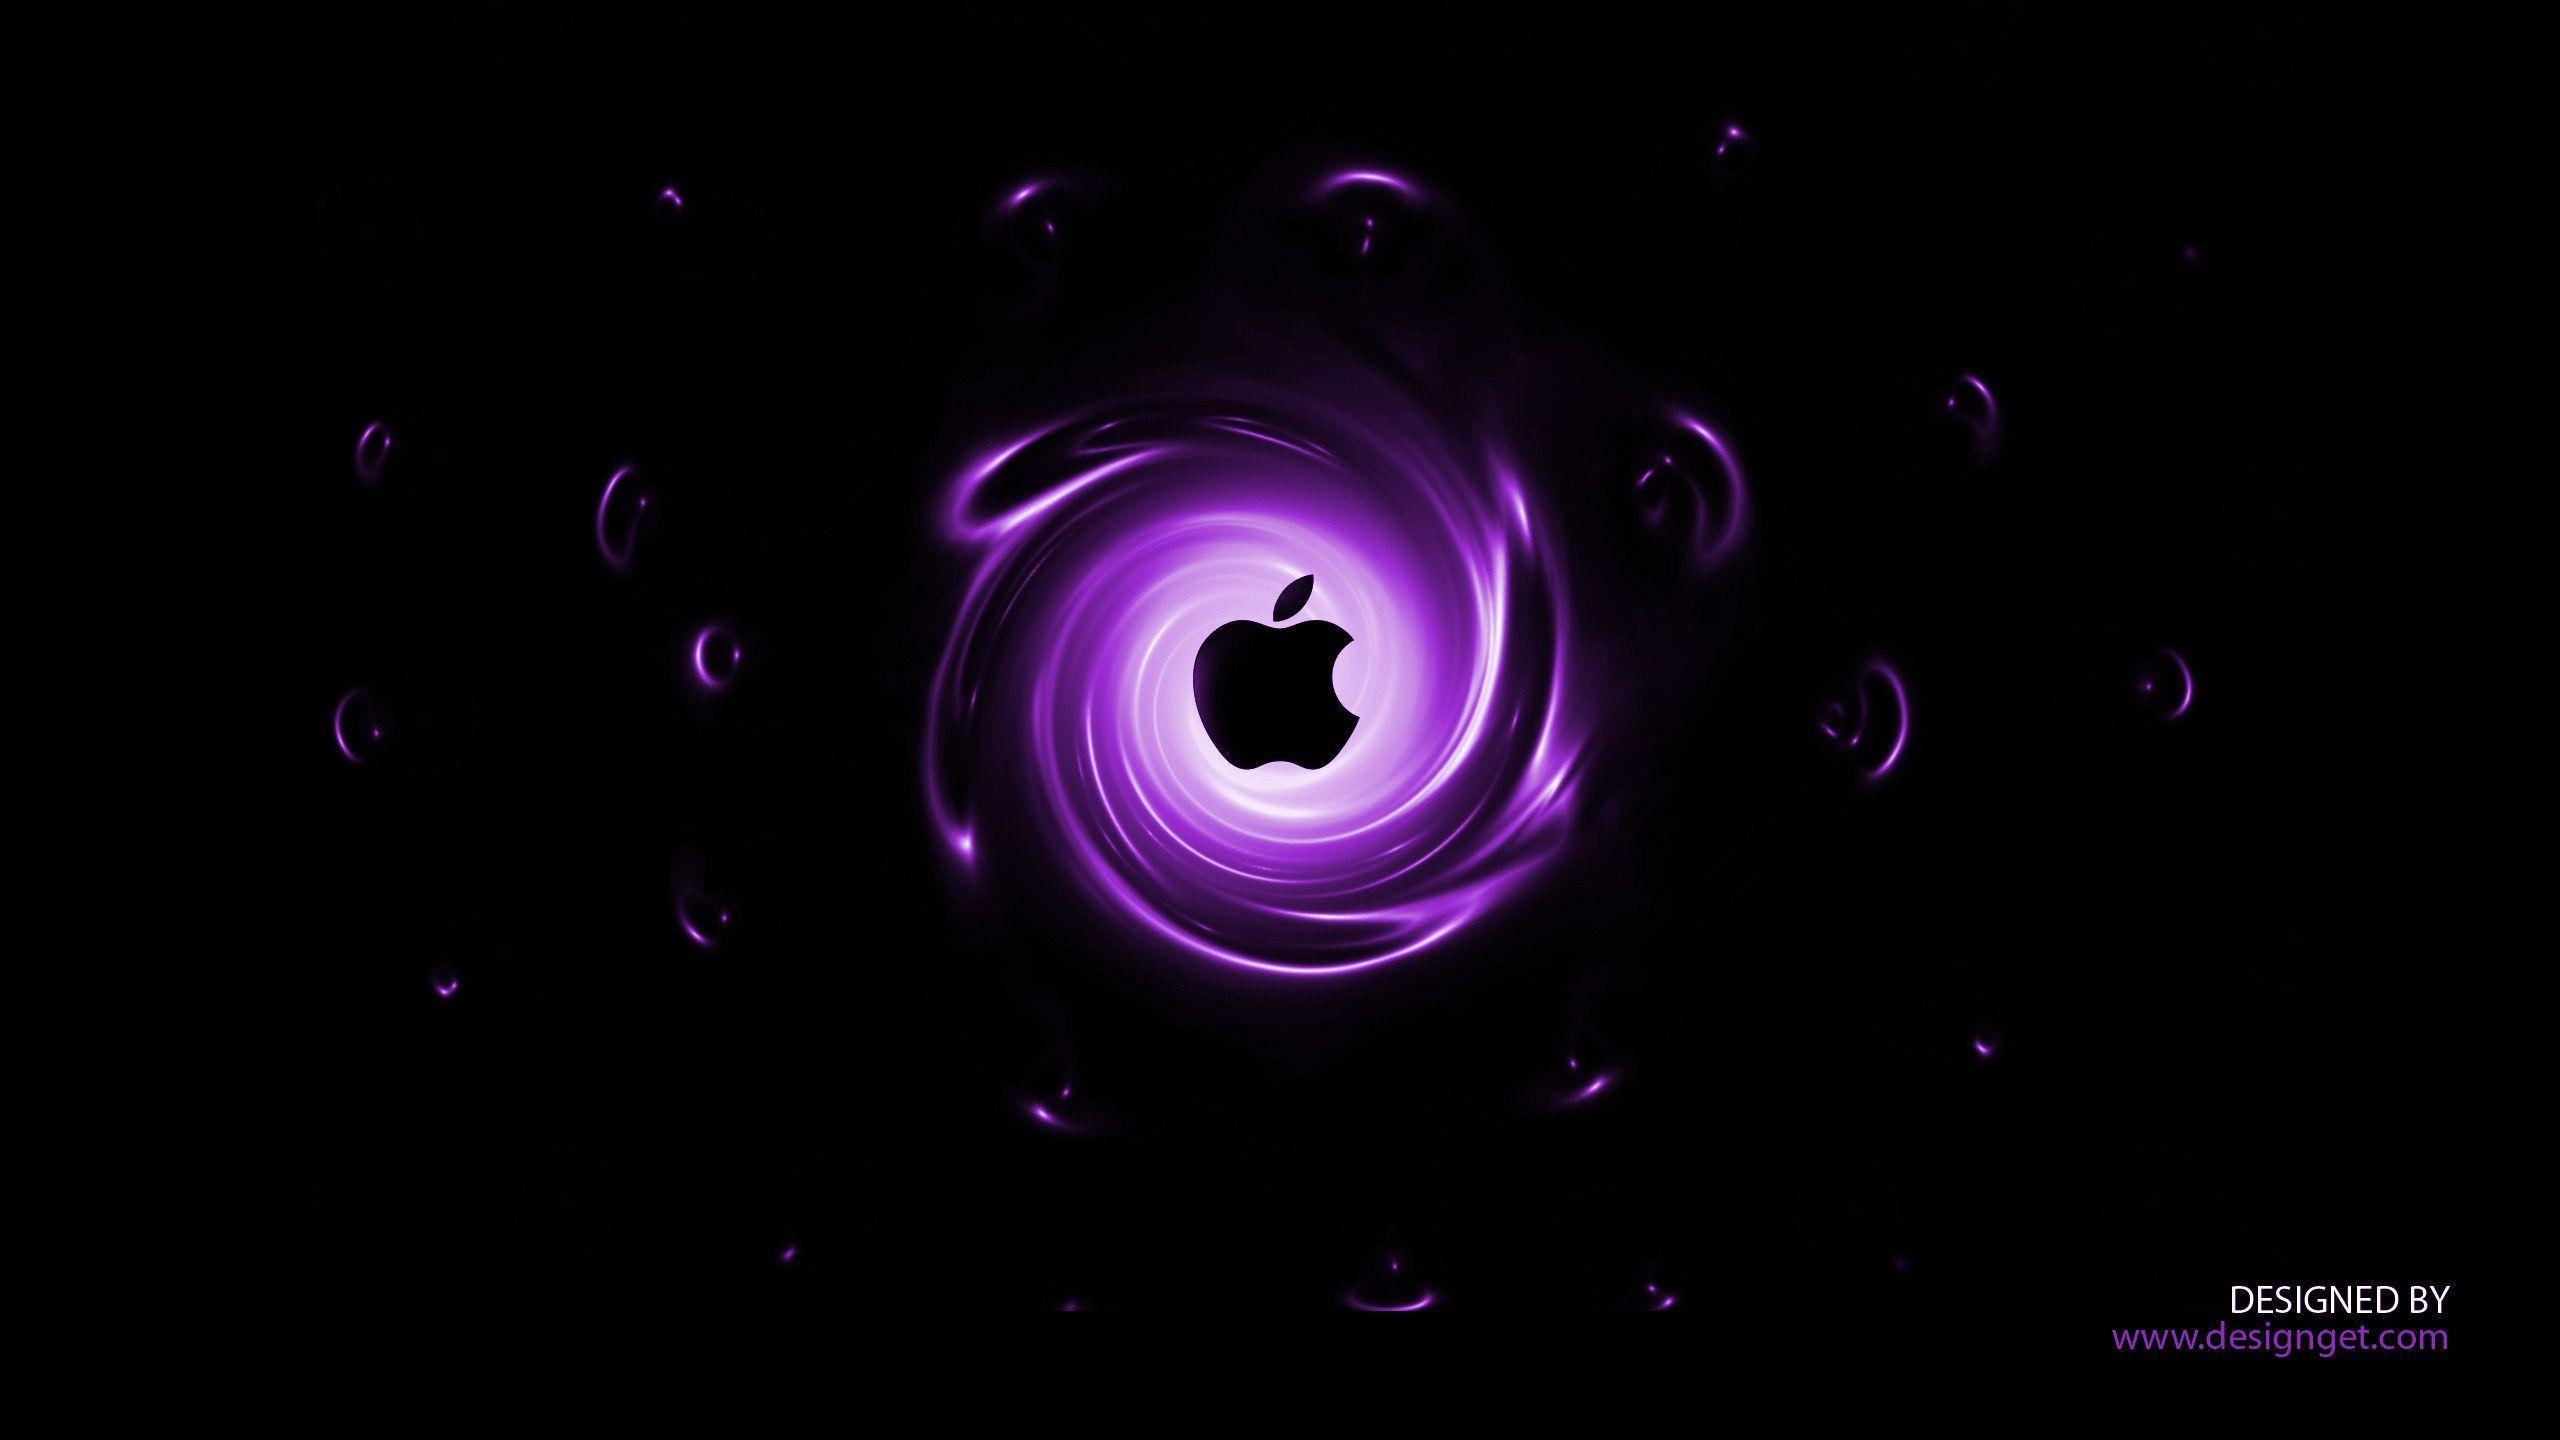 best imac wallpaper - Image And Wallpaper free to download